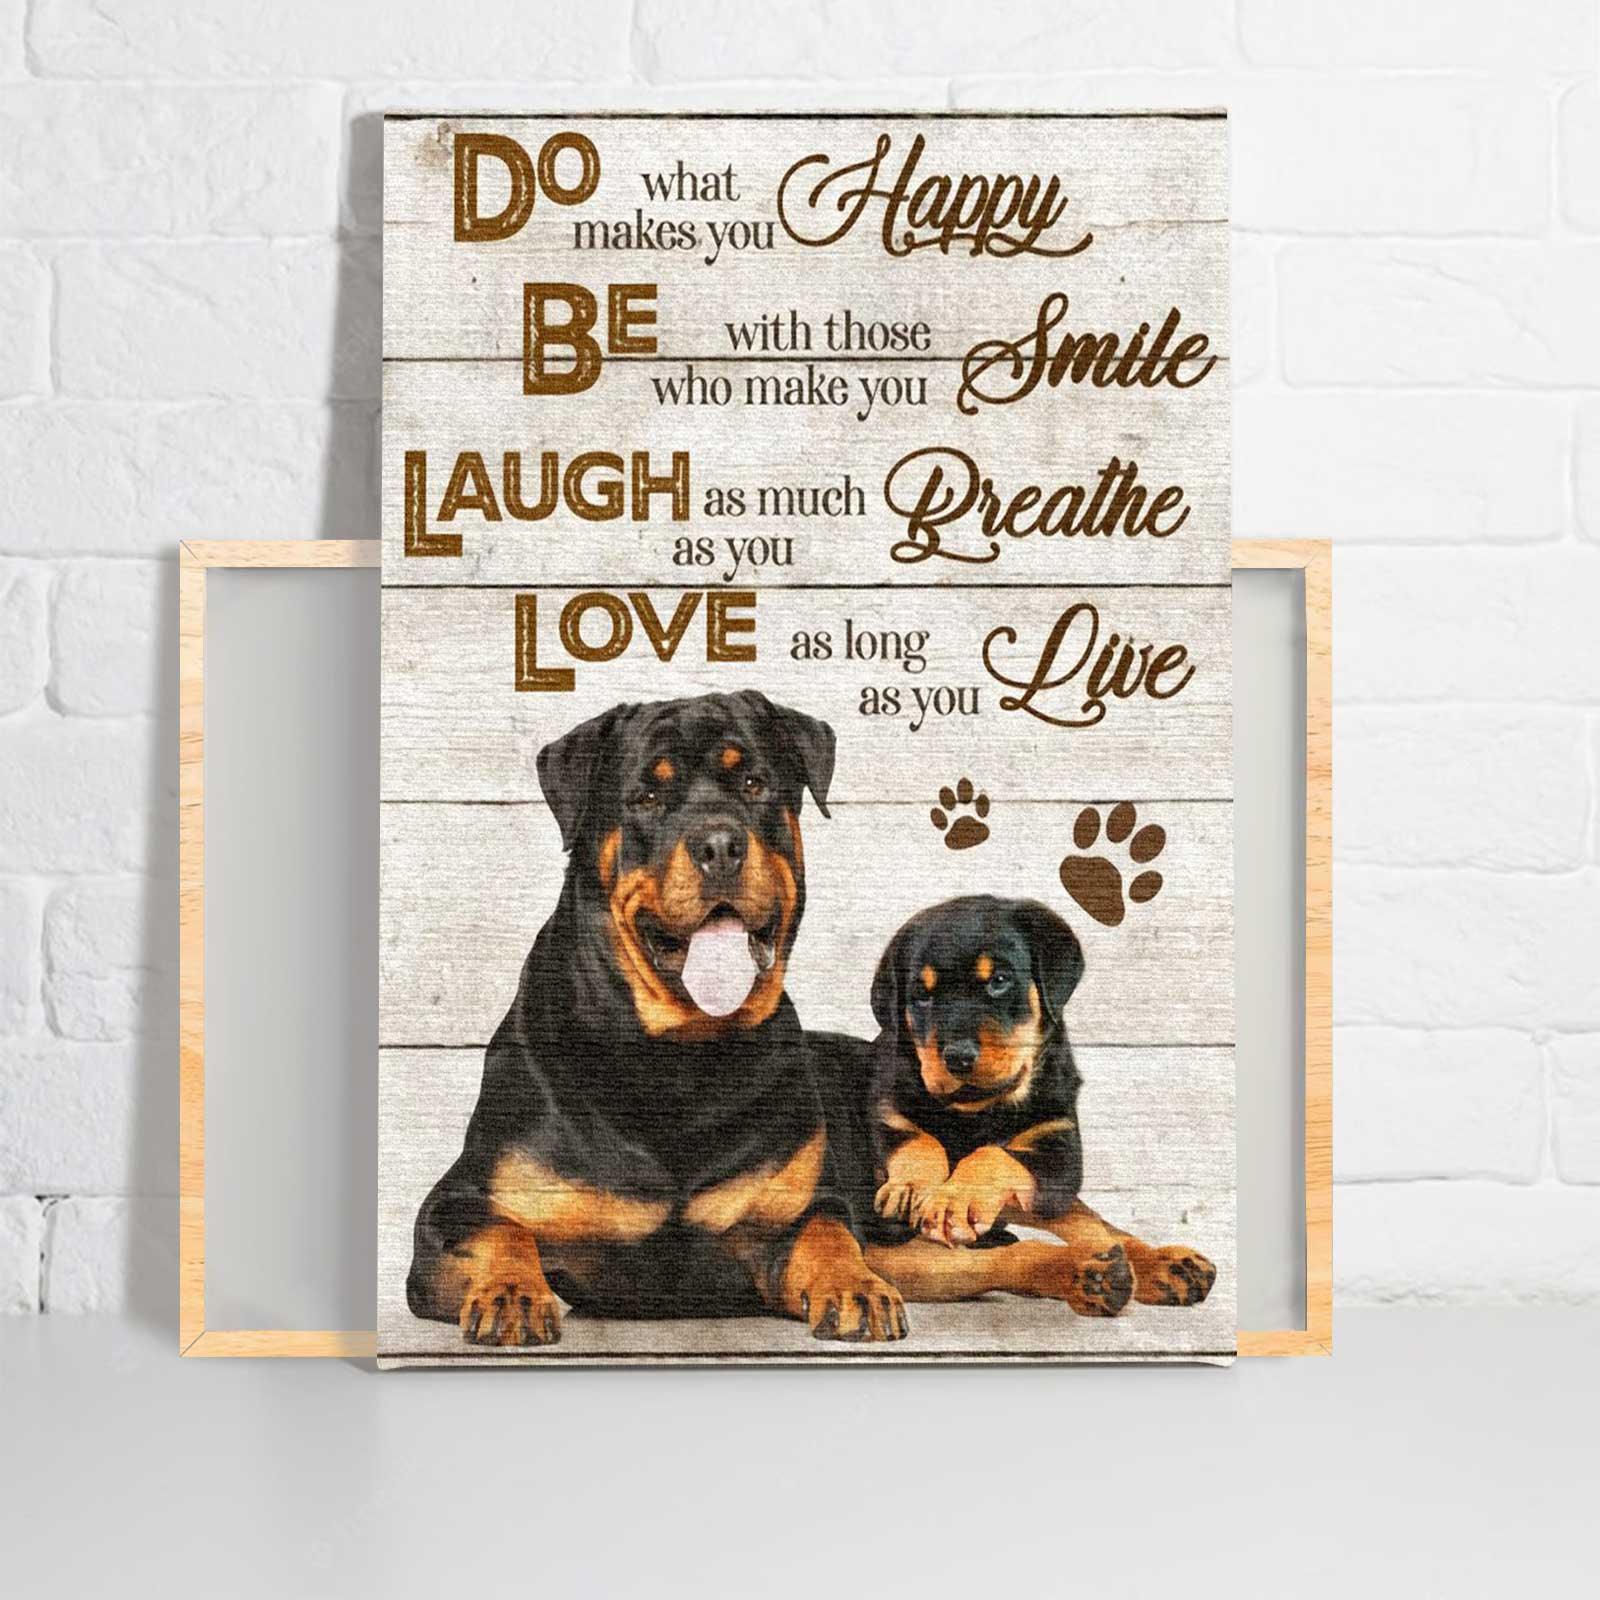 Rottweiler Landscape Canvas - Rottweiler Dog Do What Makes You Happy Landscape Canvas - Gift For Dog Lovers, Rottweiler Owner, Friends, Family - Amzanimalsgift